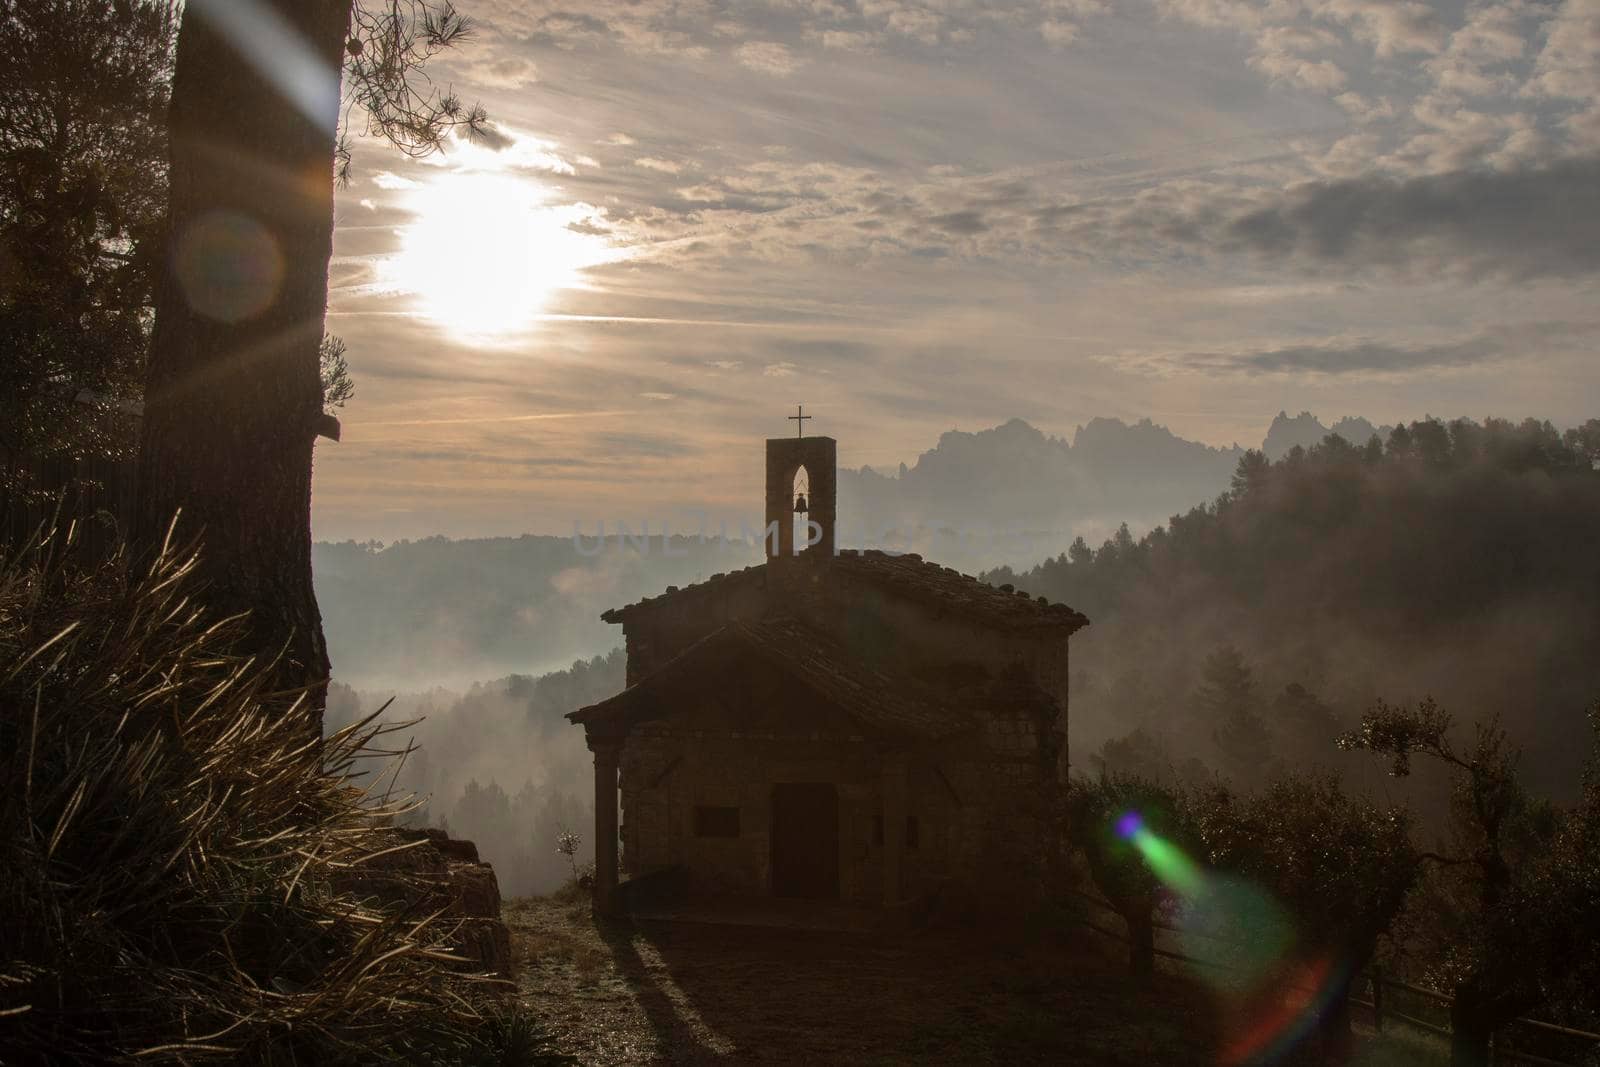 Misty beautiful landscape showing a small church and some mountains